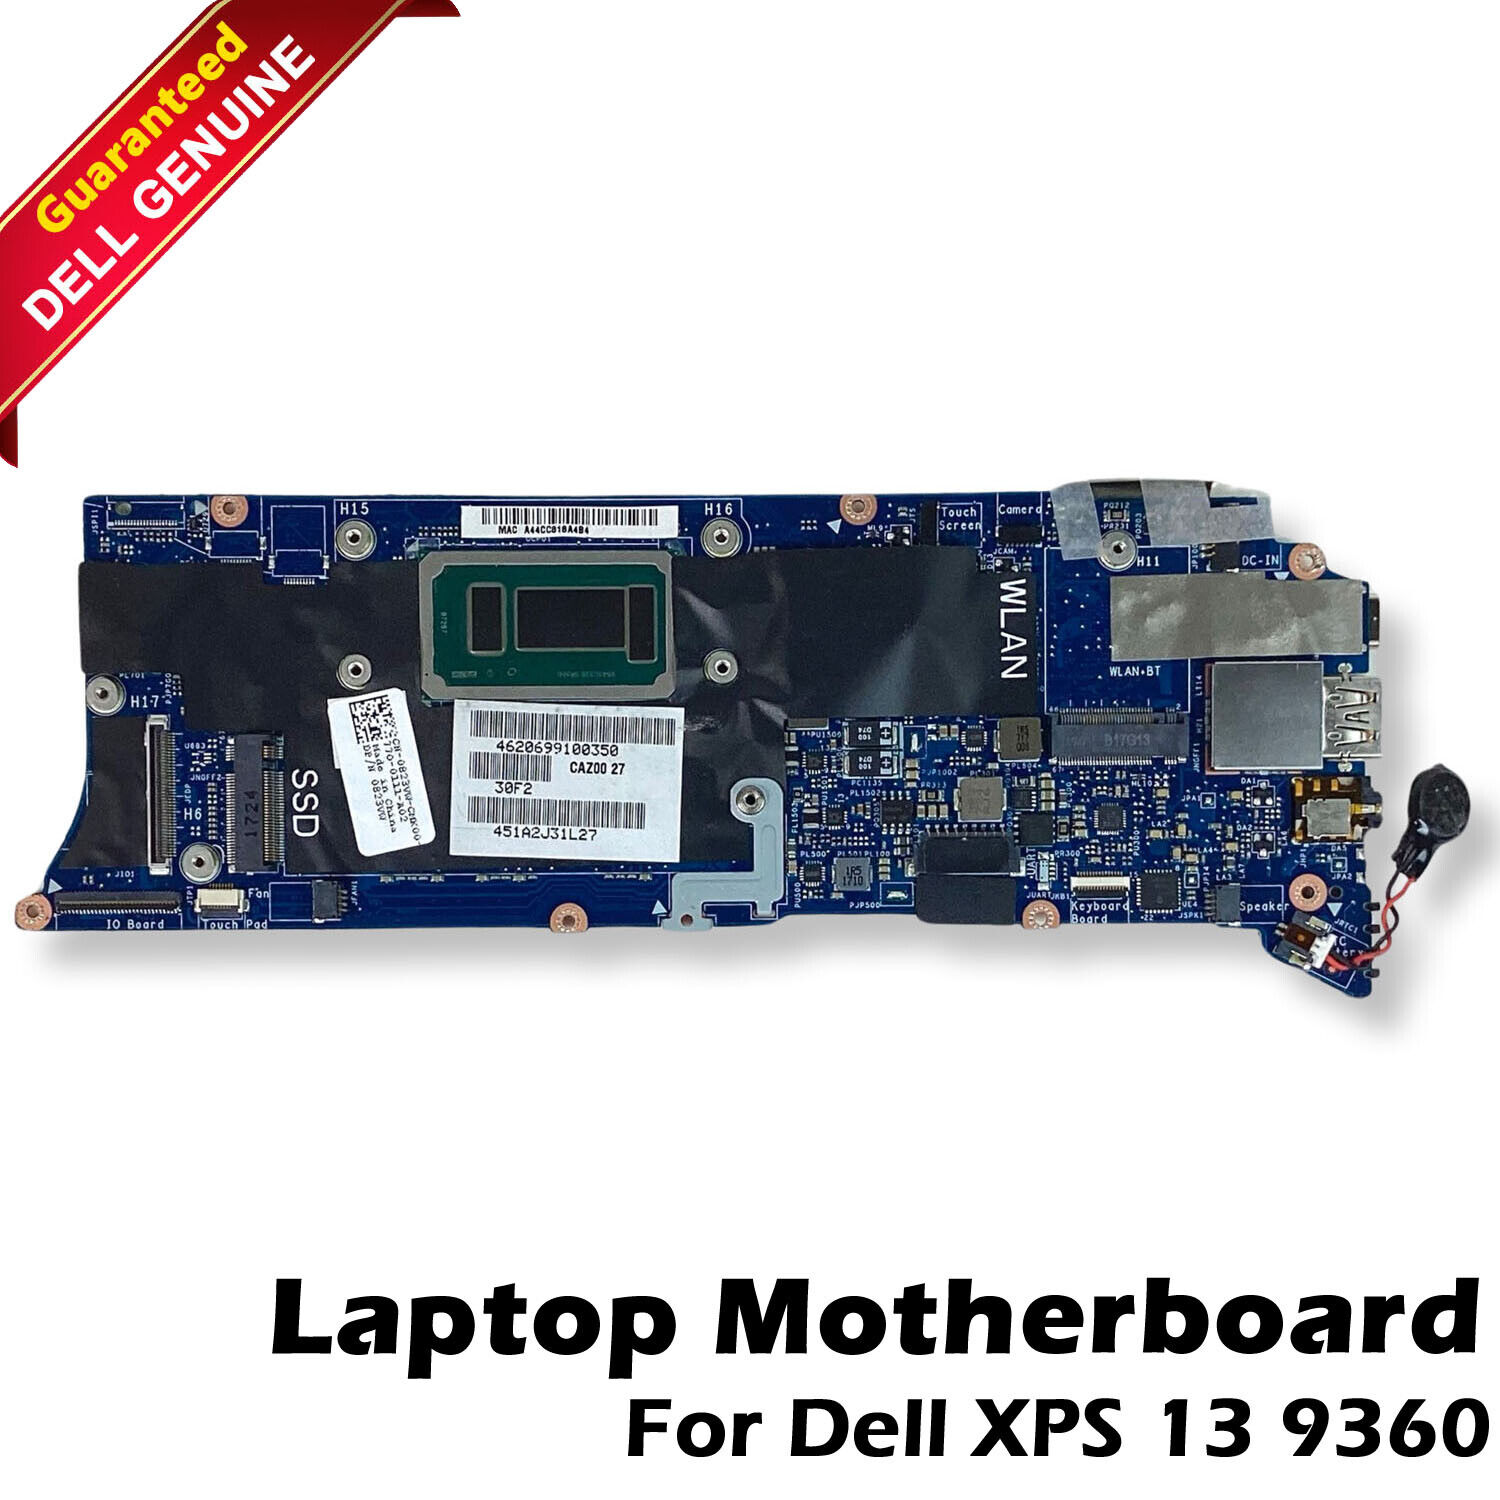 Dell OEM XPS 13 9360 Motherboard System Board with 2.4GHz Intel i7 CPU 8GB 823VW